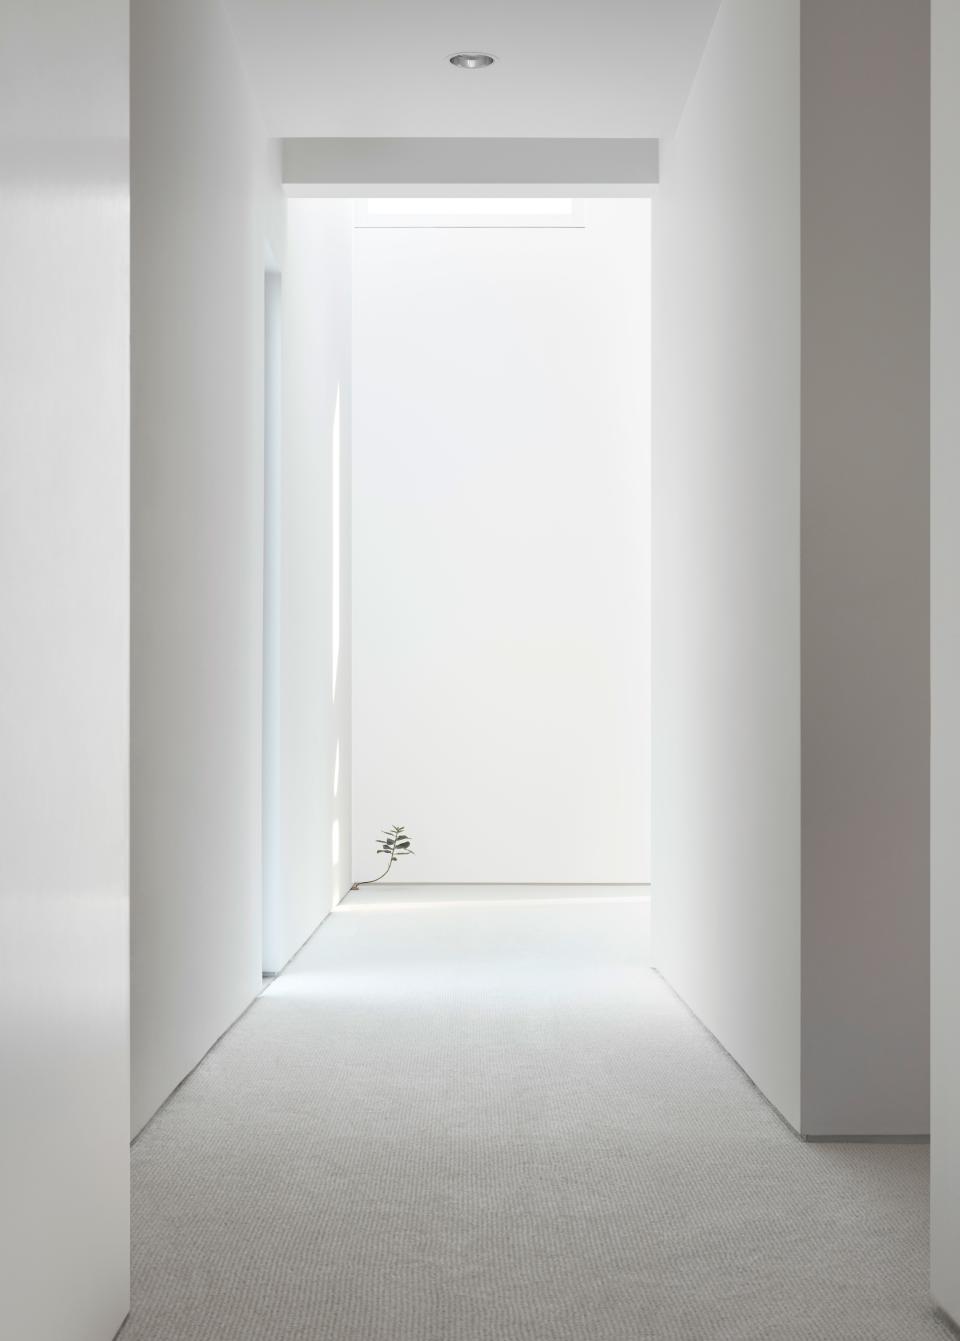 The stark white hallway leading to the master bedroom was the perfect place to install one of the couple’s favorite pieces: a diminutive Tony Matelli weed sculpture. “It looks like it’s growing out of the corner,” says Kristen.